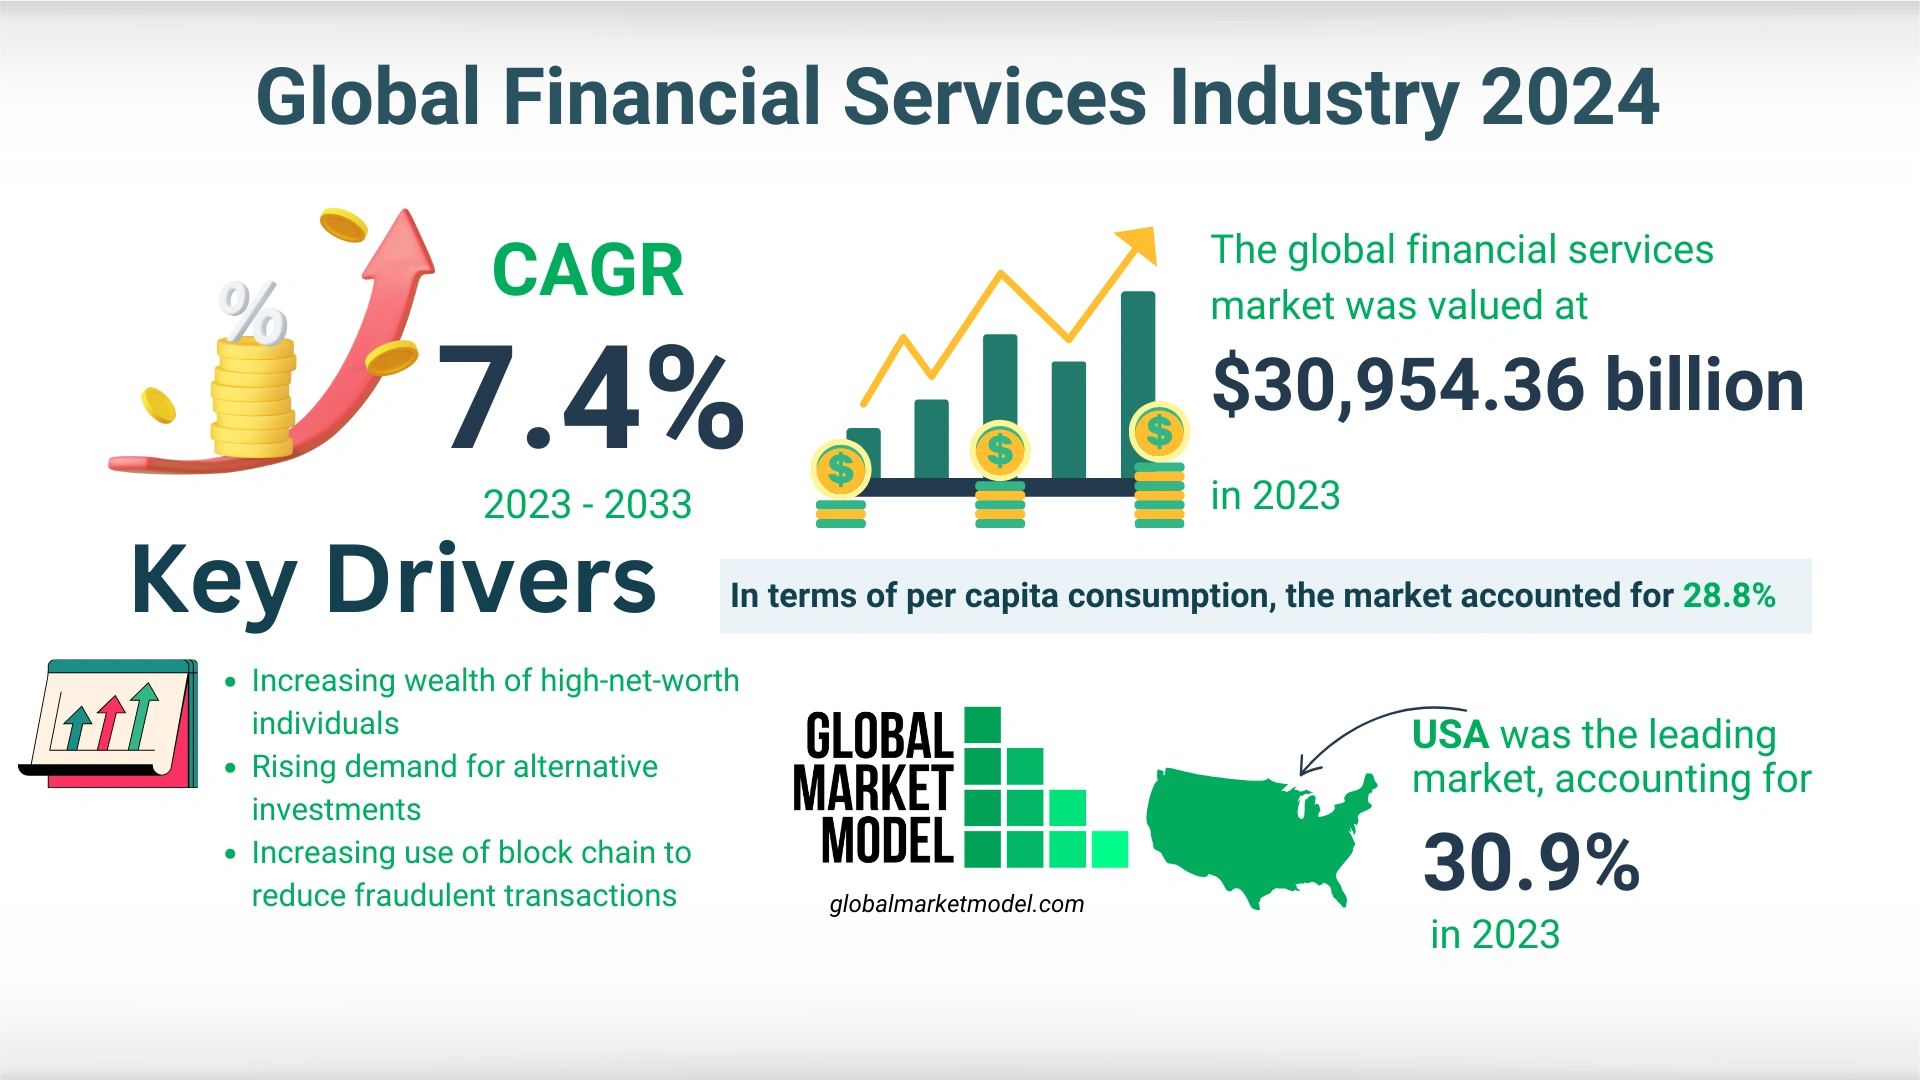  Overview Of The Financial Services Industry 2024